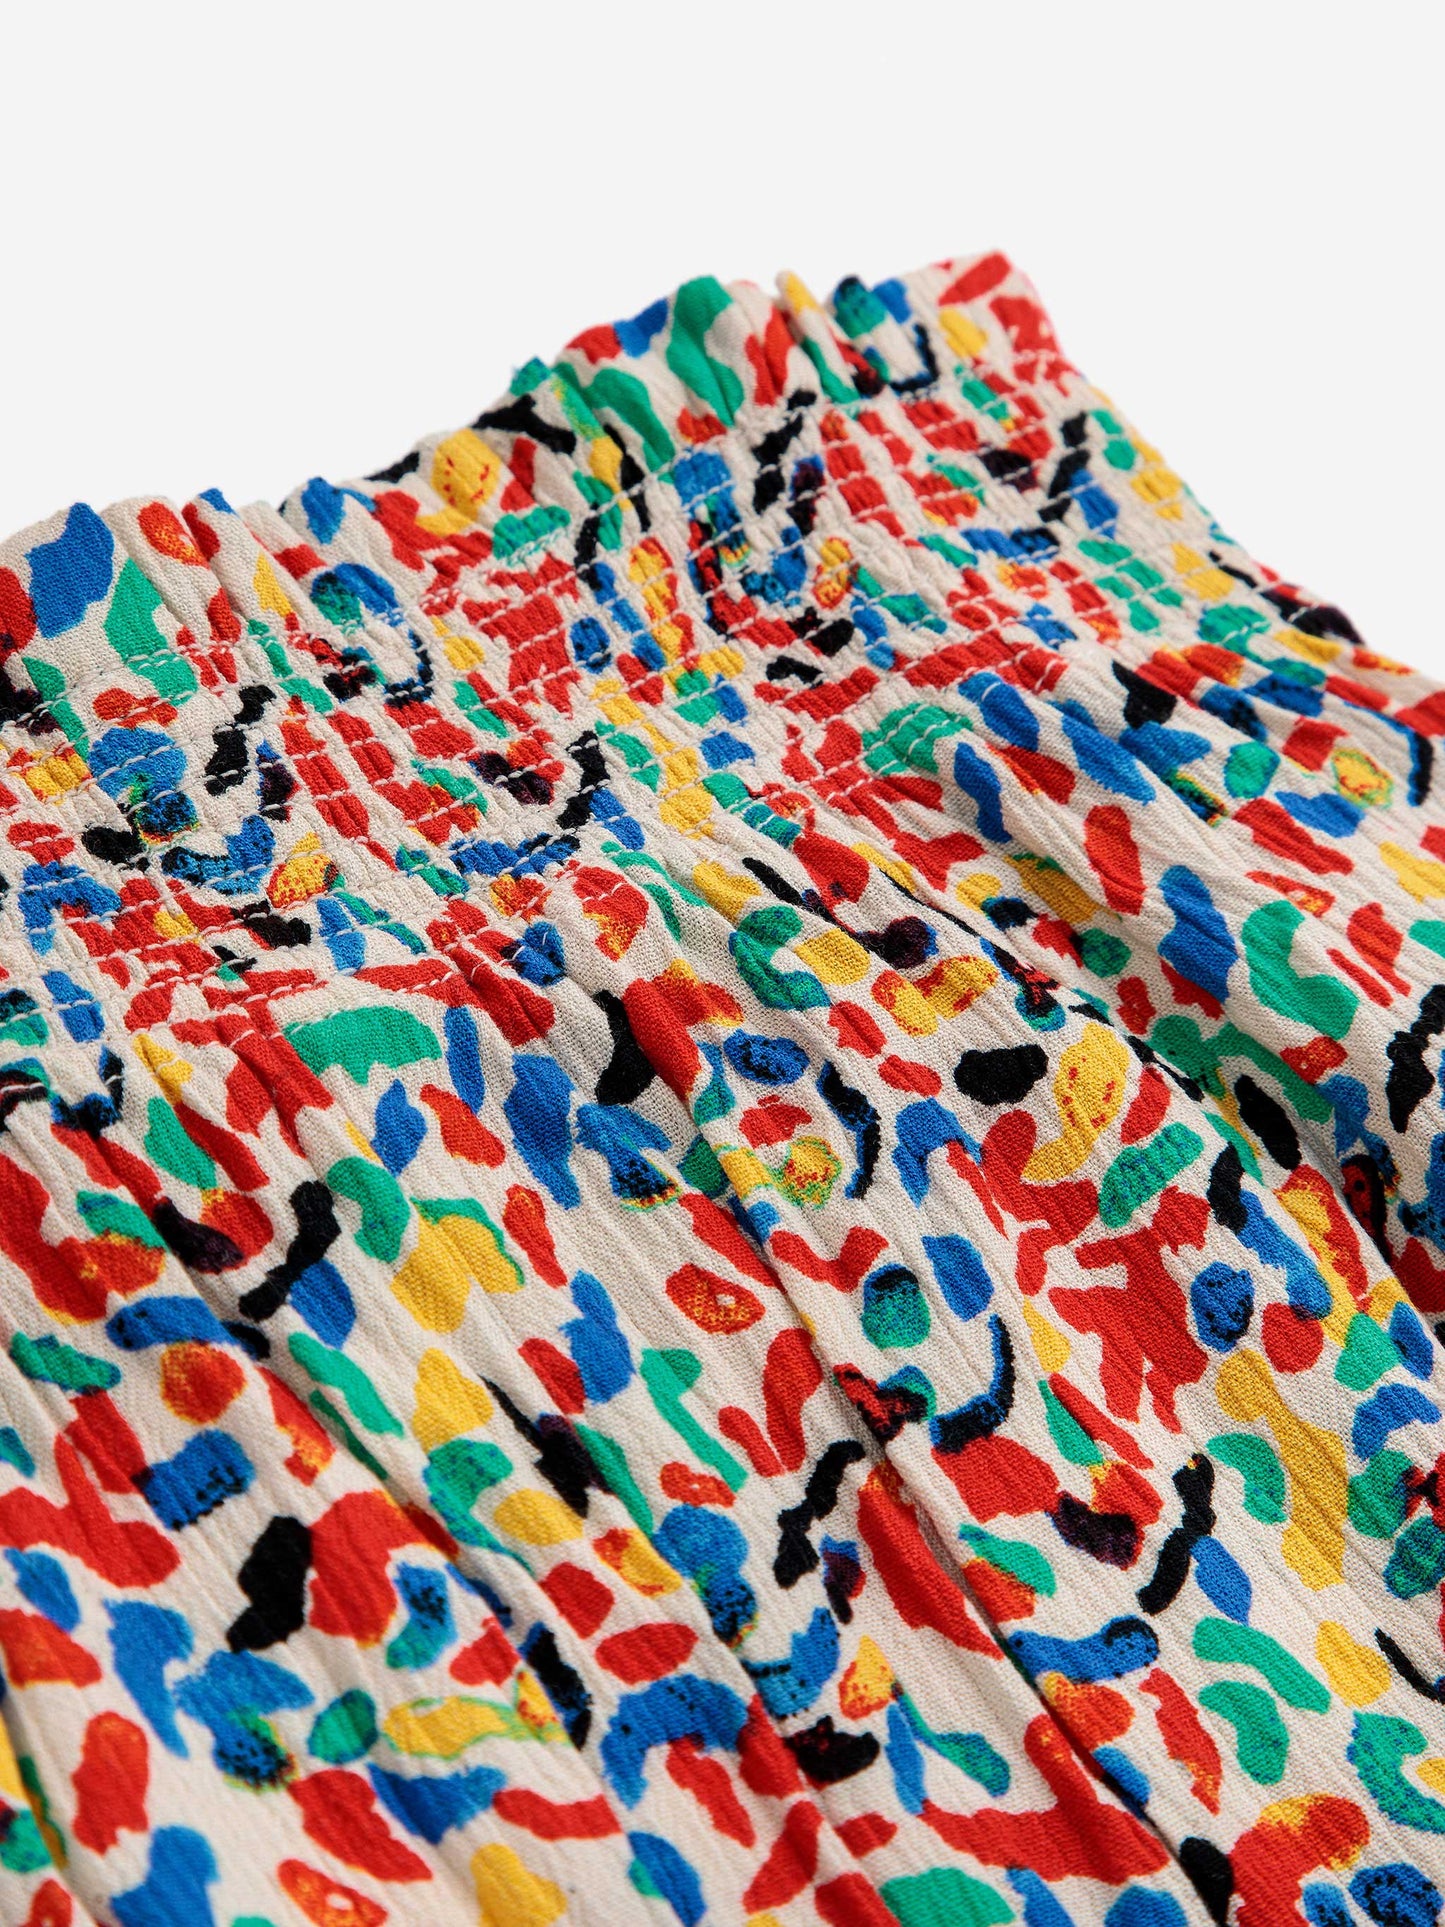 Confetti all over woven harem pants